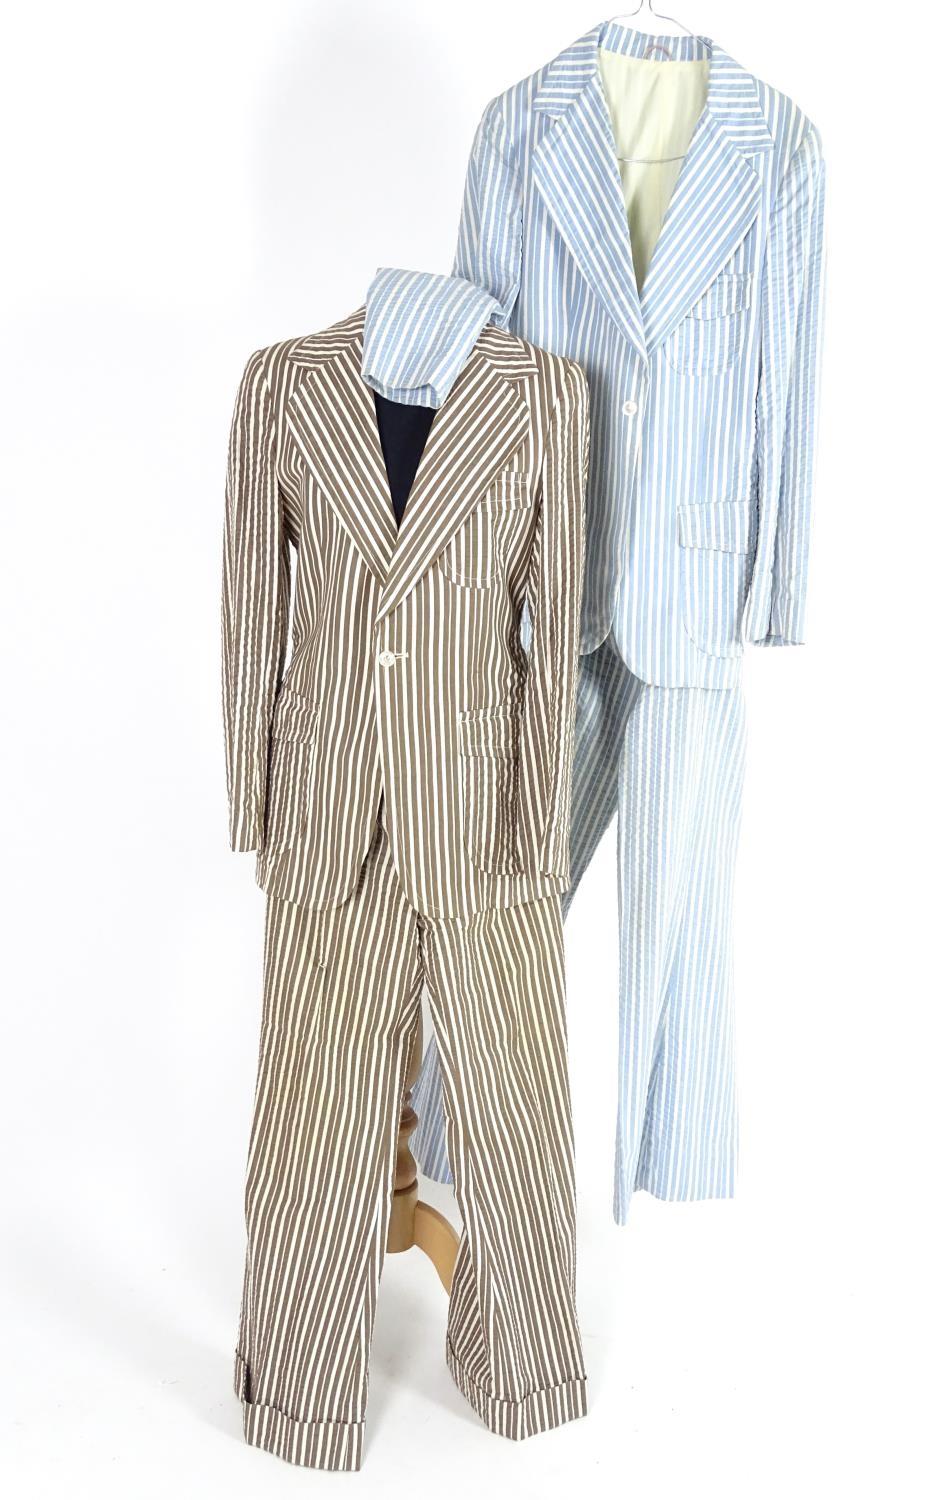 2 vintage stripy suits by Austins, a light brown and cream striped jacket and trousers along with - Image 3 of 10